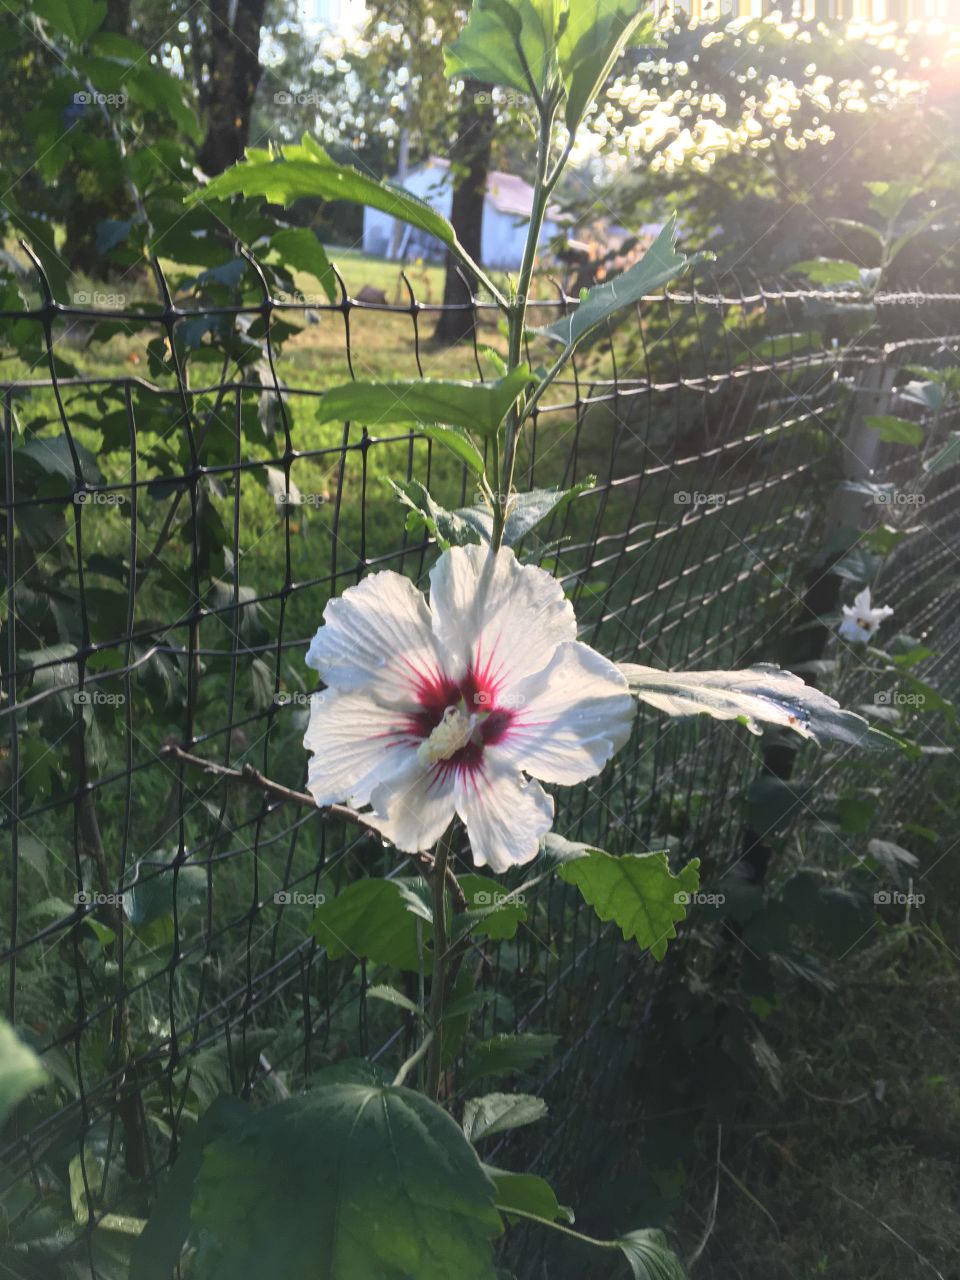 Good morning,welcome my new rose of Sharon. I have two purple plants this was a surprise!